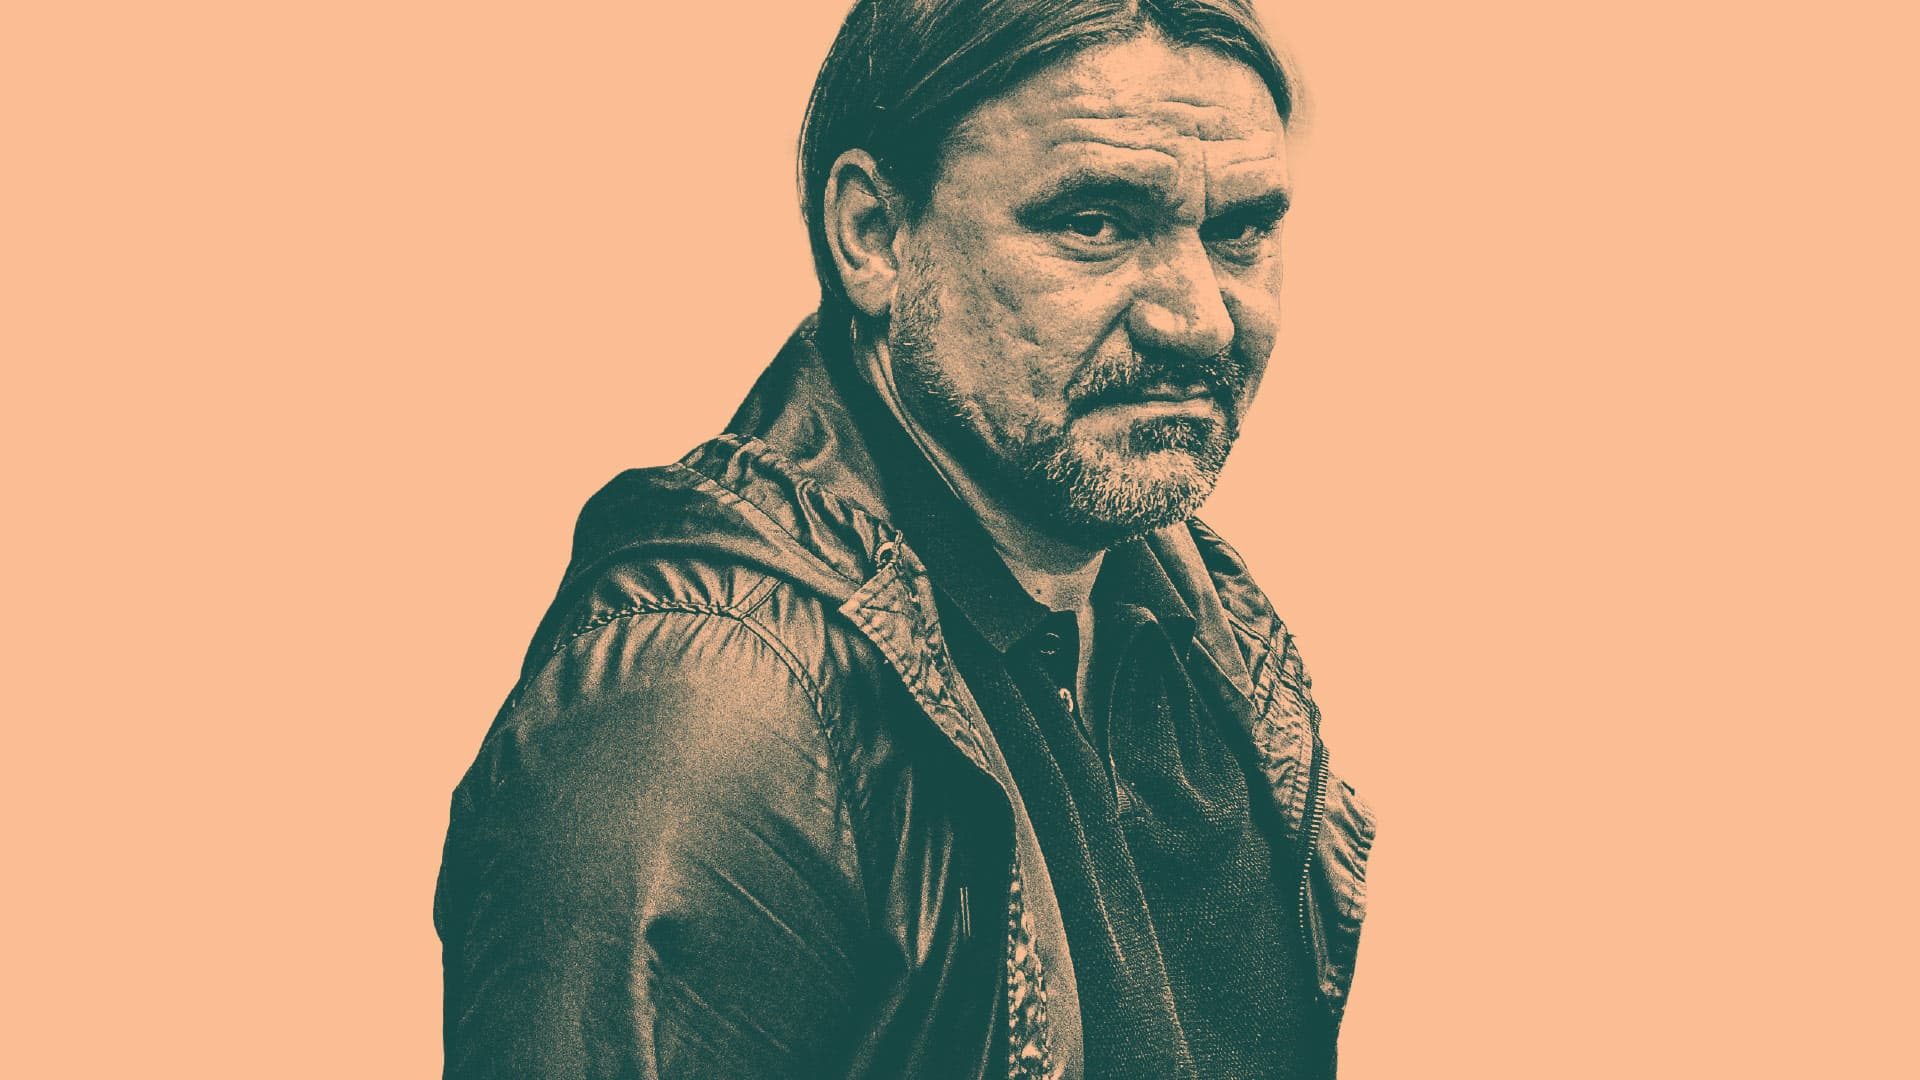 Daniel Farke, with an expression on his face which suggests he's either smirking slightly or he's smelled something unpleasant